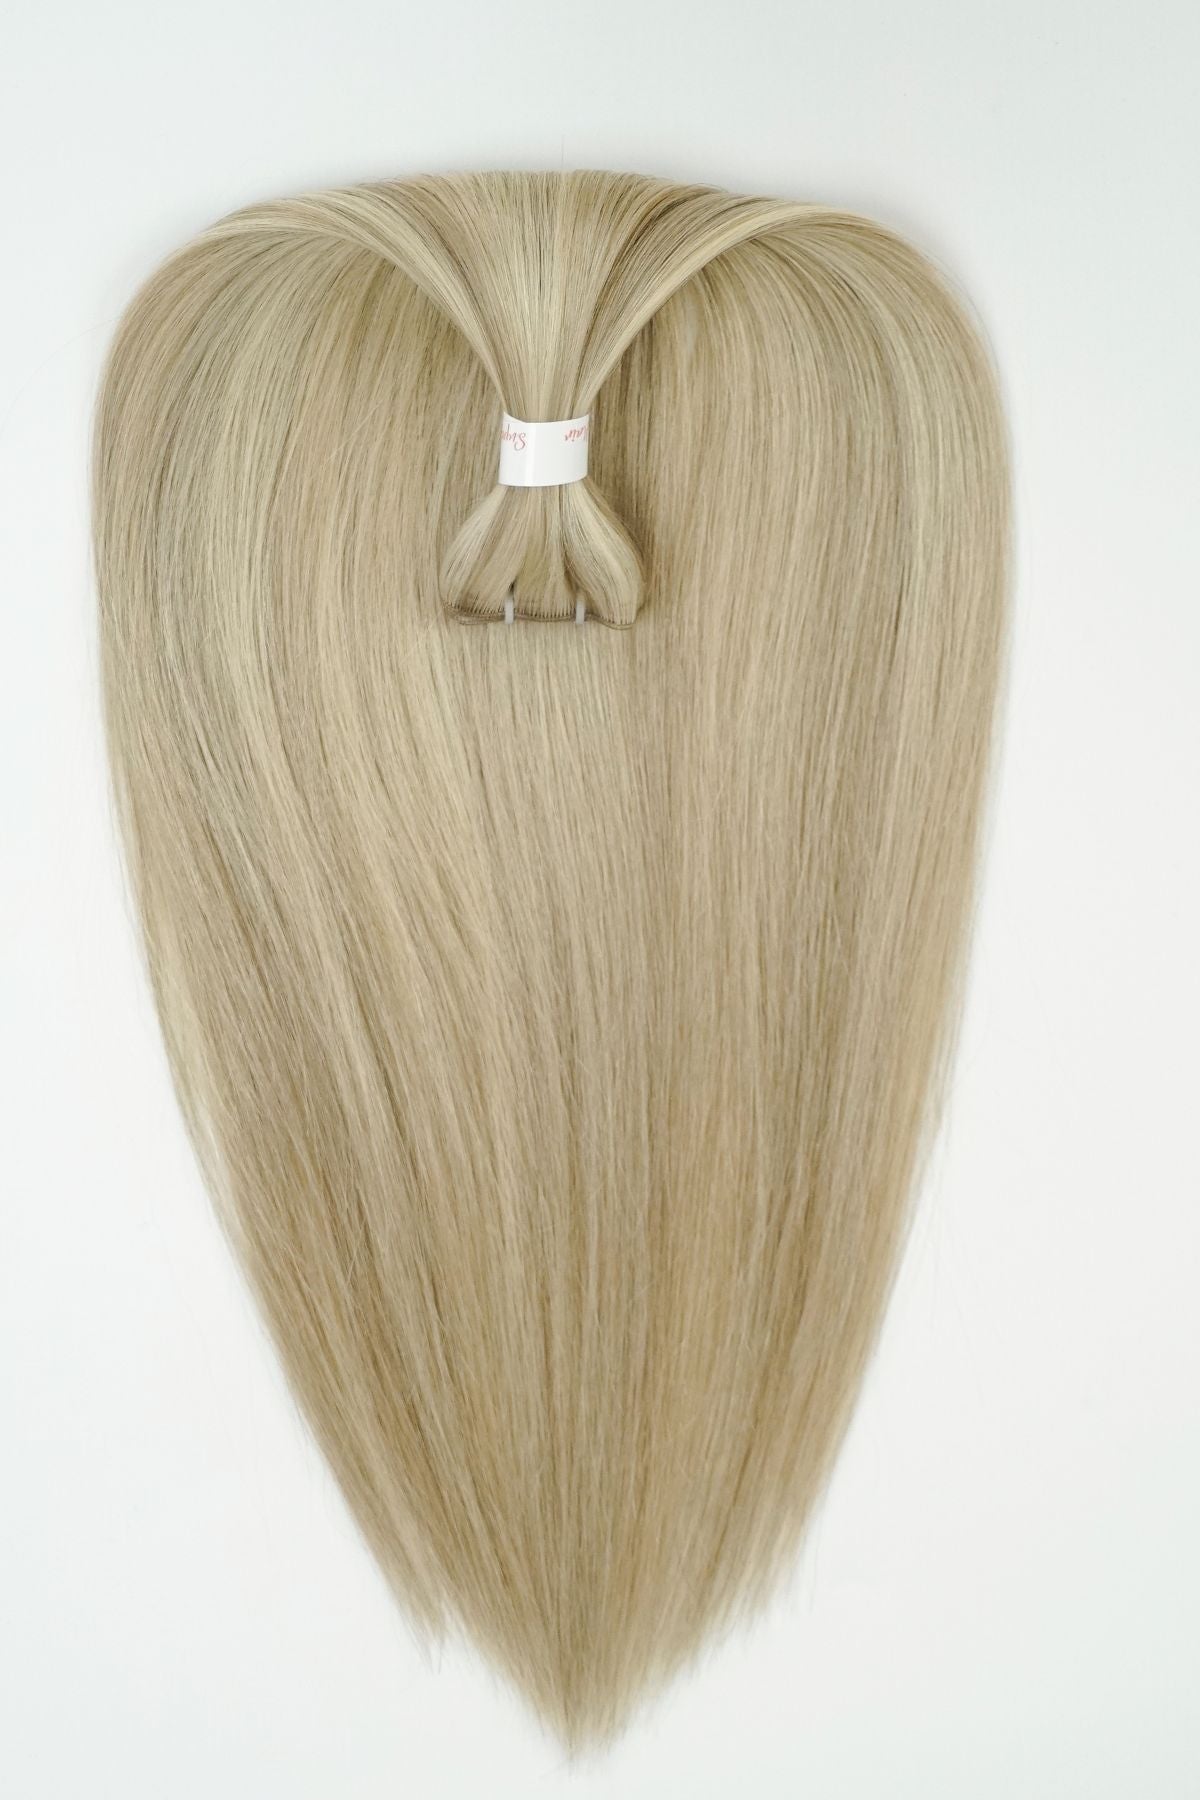 Genius weft hair extensions are virtually undetectable, seamless, and super blendable. The Genius Hand-Tied extensions are a brilliant new weft design that can be cut directly anywhere on the seam without the weft unravelling! The track is minuscule compared to machine-made wefts making this option ideal for people with thin to medium hair. The Genius Weft extensions give you the freedom to customize every sew-in hair transformation.